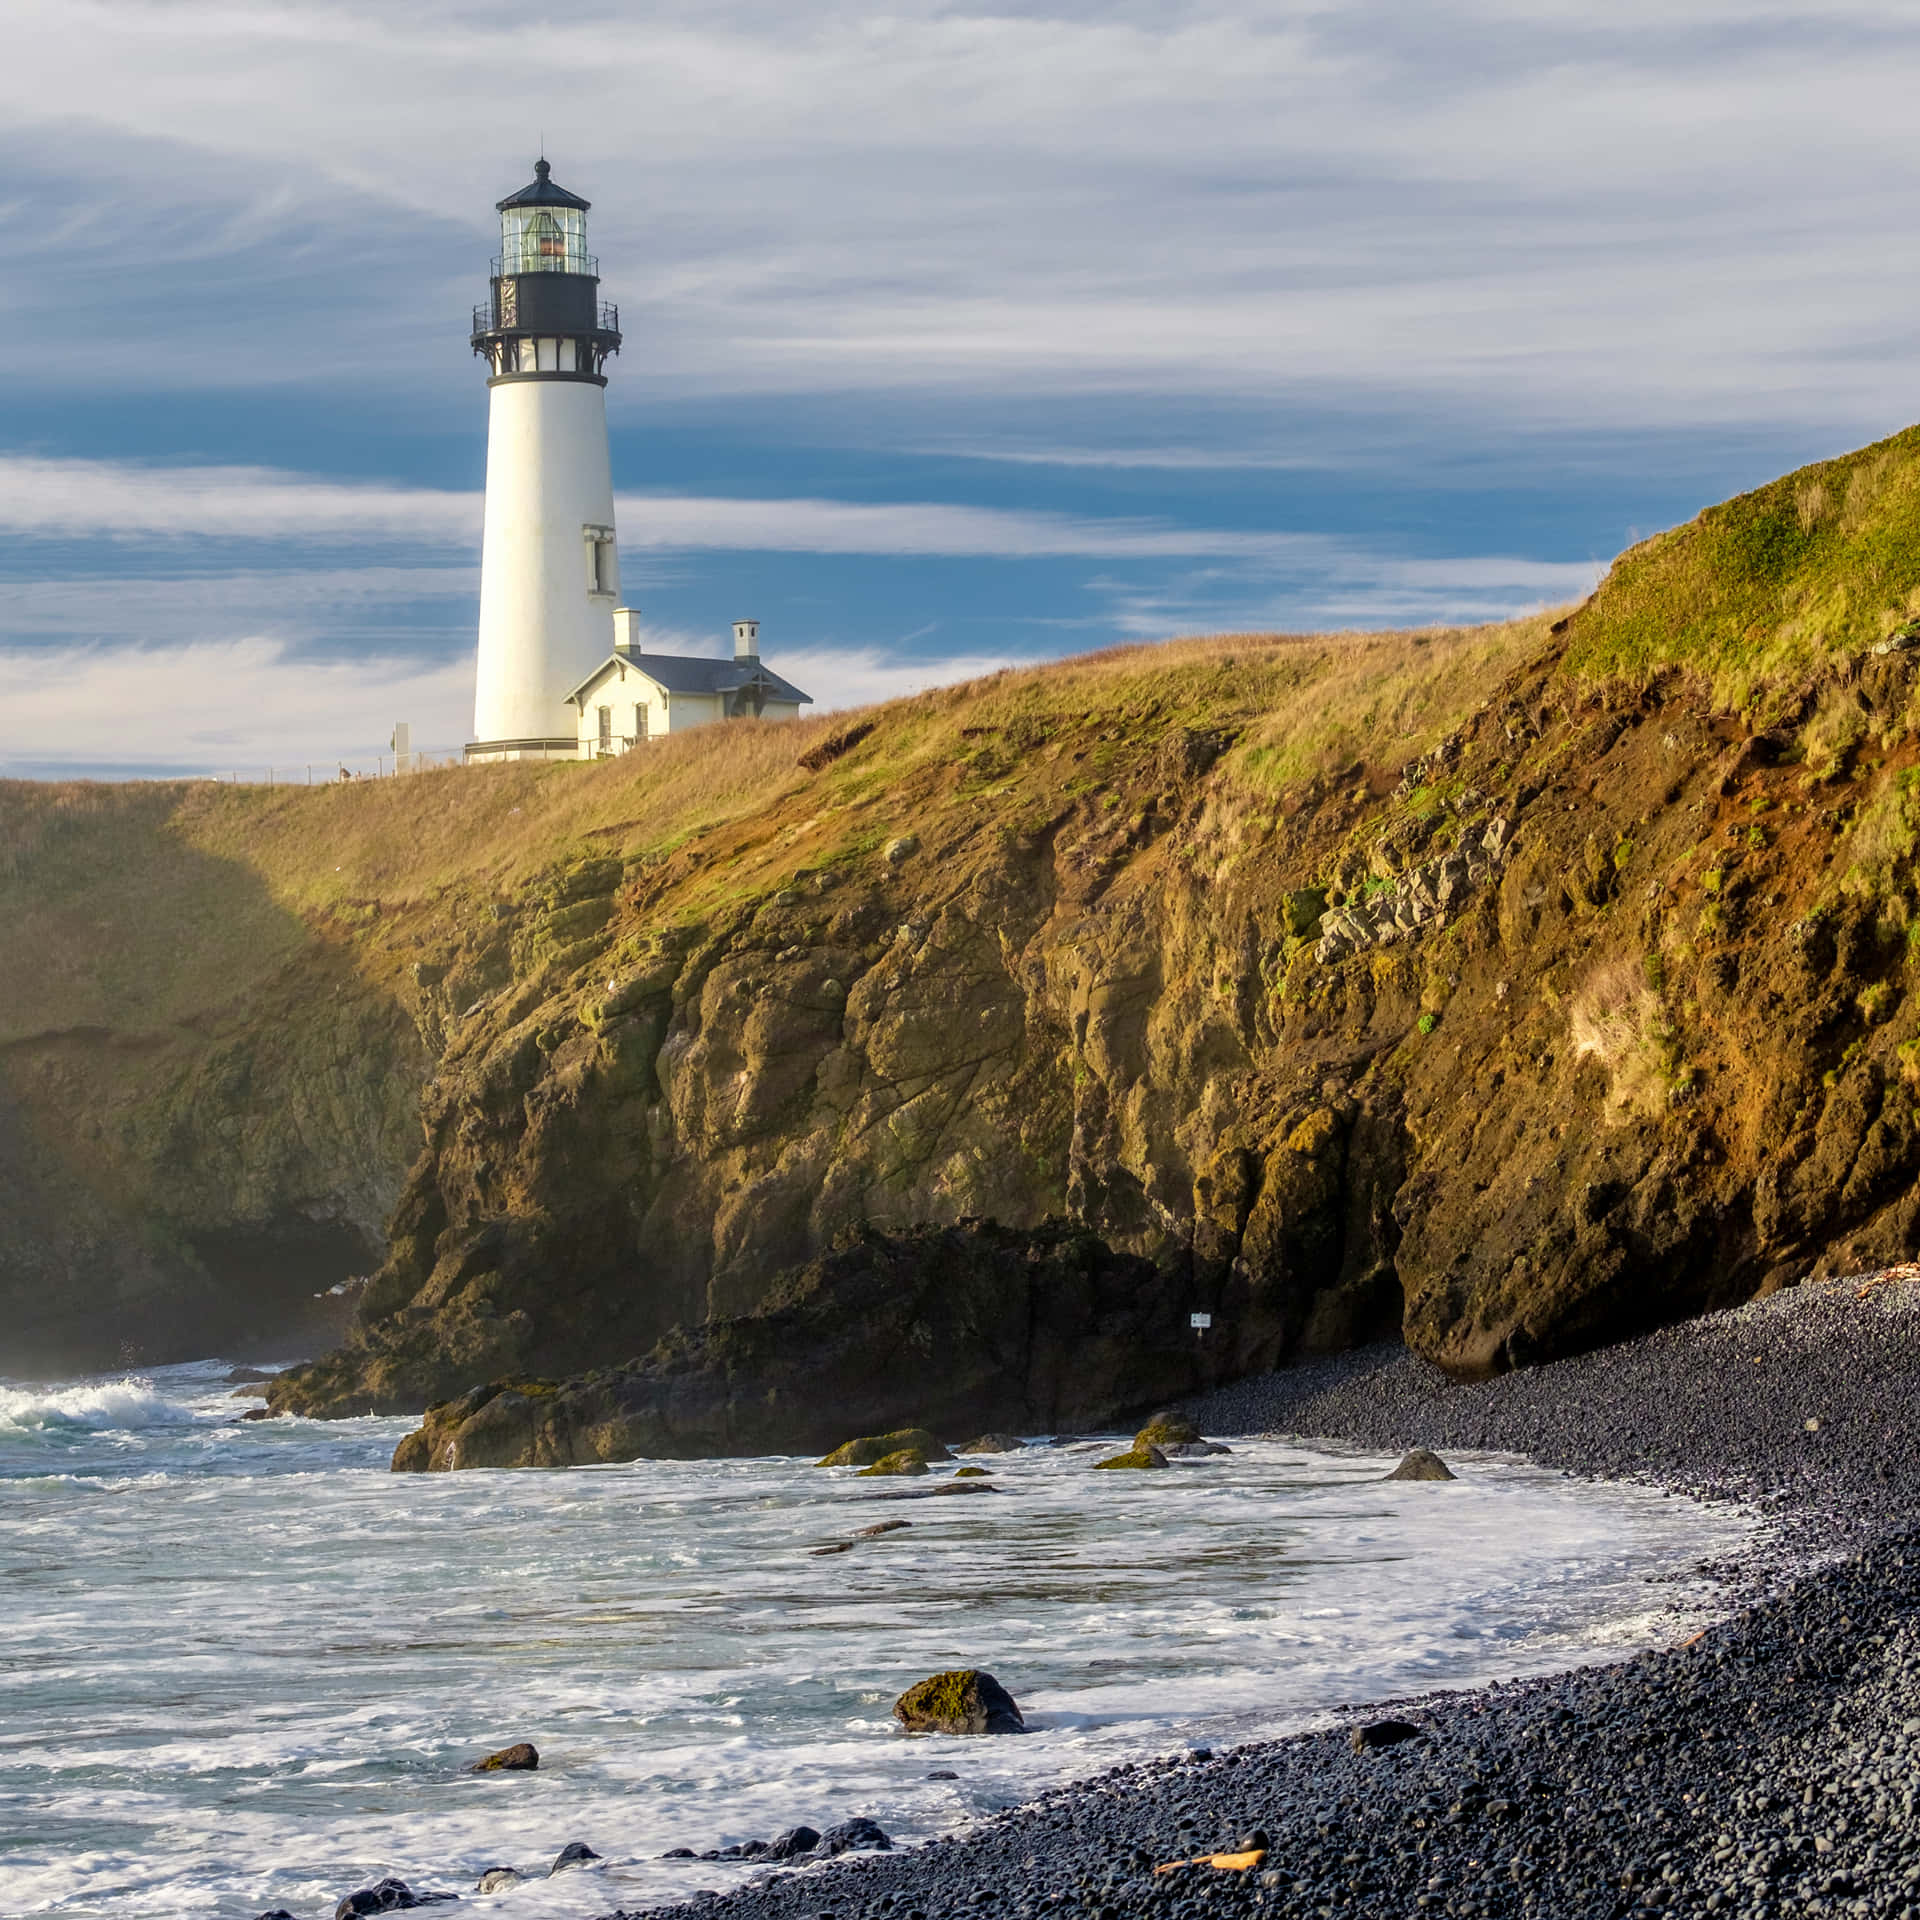 Enjoy the picturesque beauty of the Oregon Coast